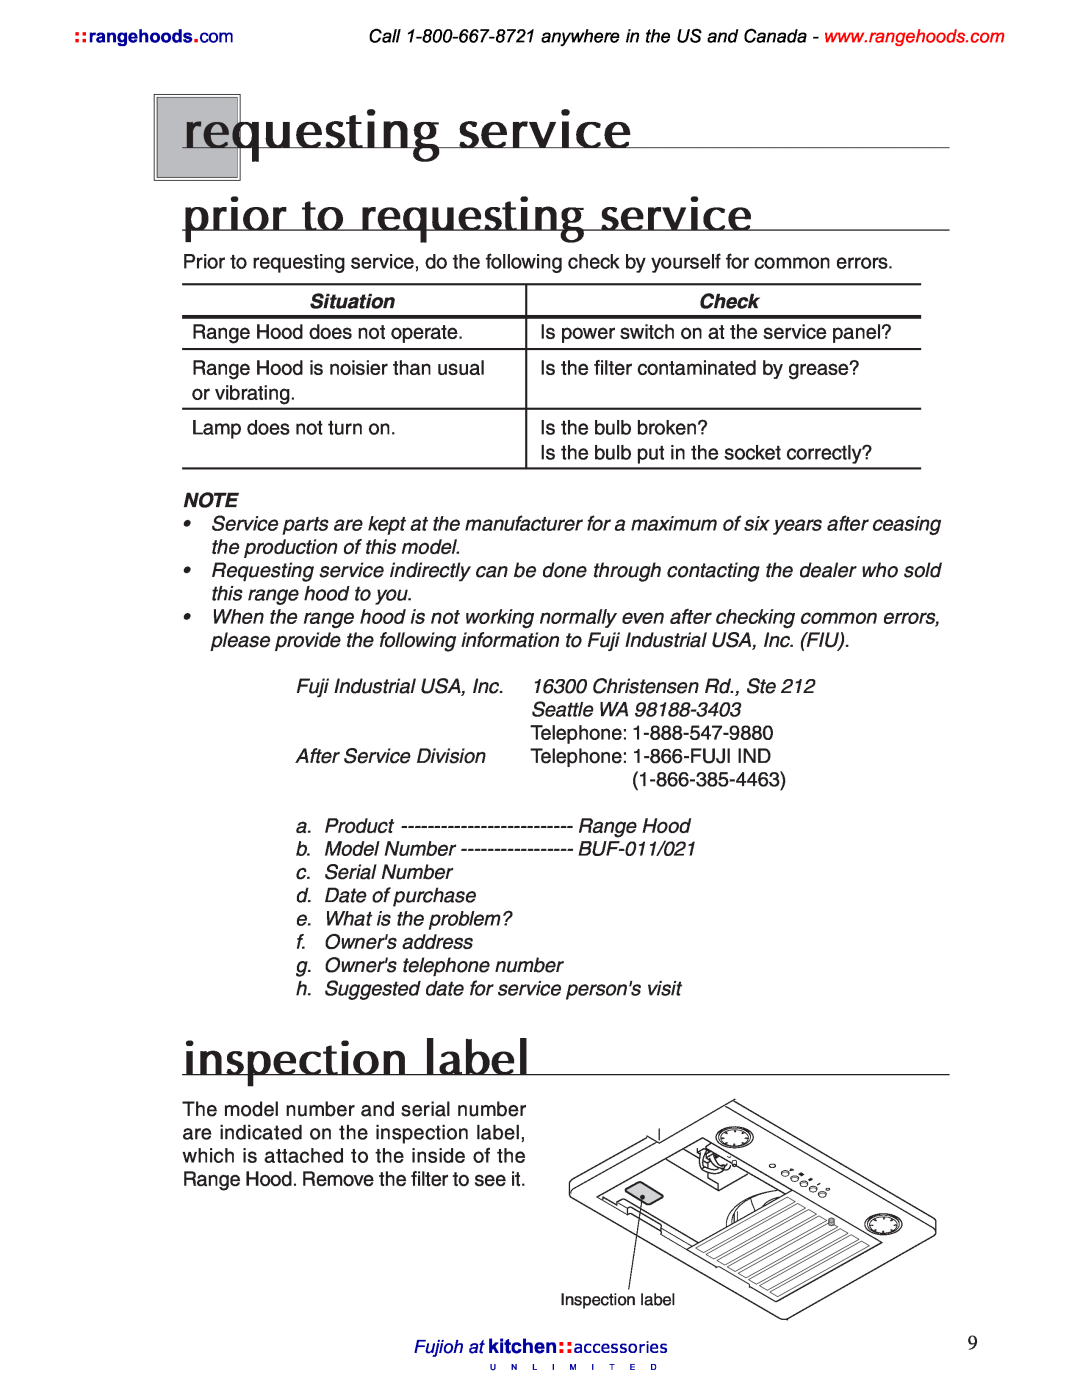 Fujioh 021, BUF-011 operation manual prior to requesting service, inspection label, Situation, Check 